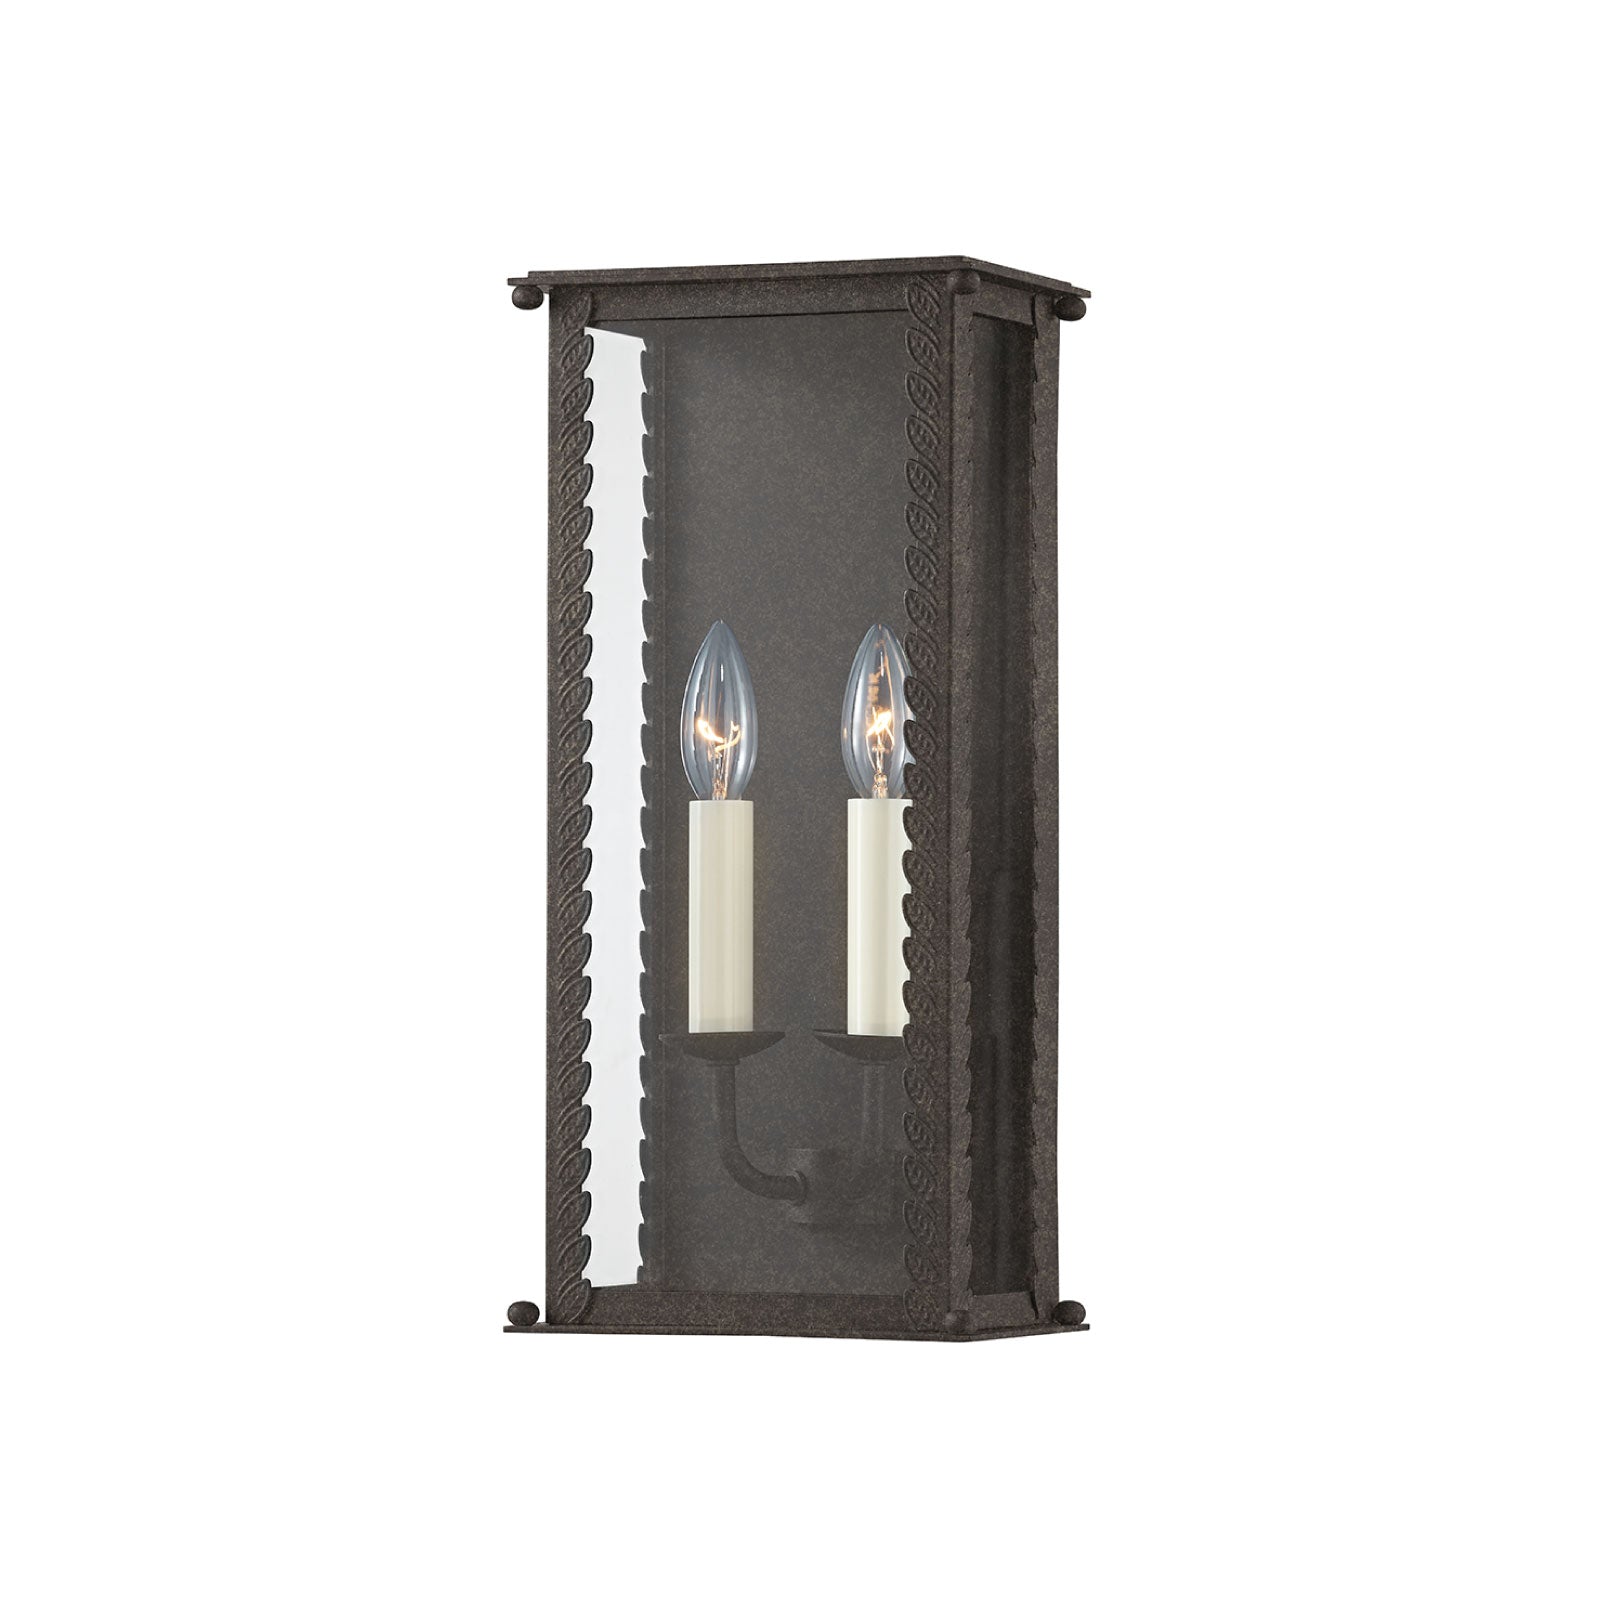 Belle Meade Medium Outdoor Wall Lantern in French Iron